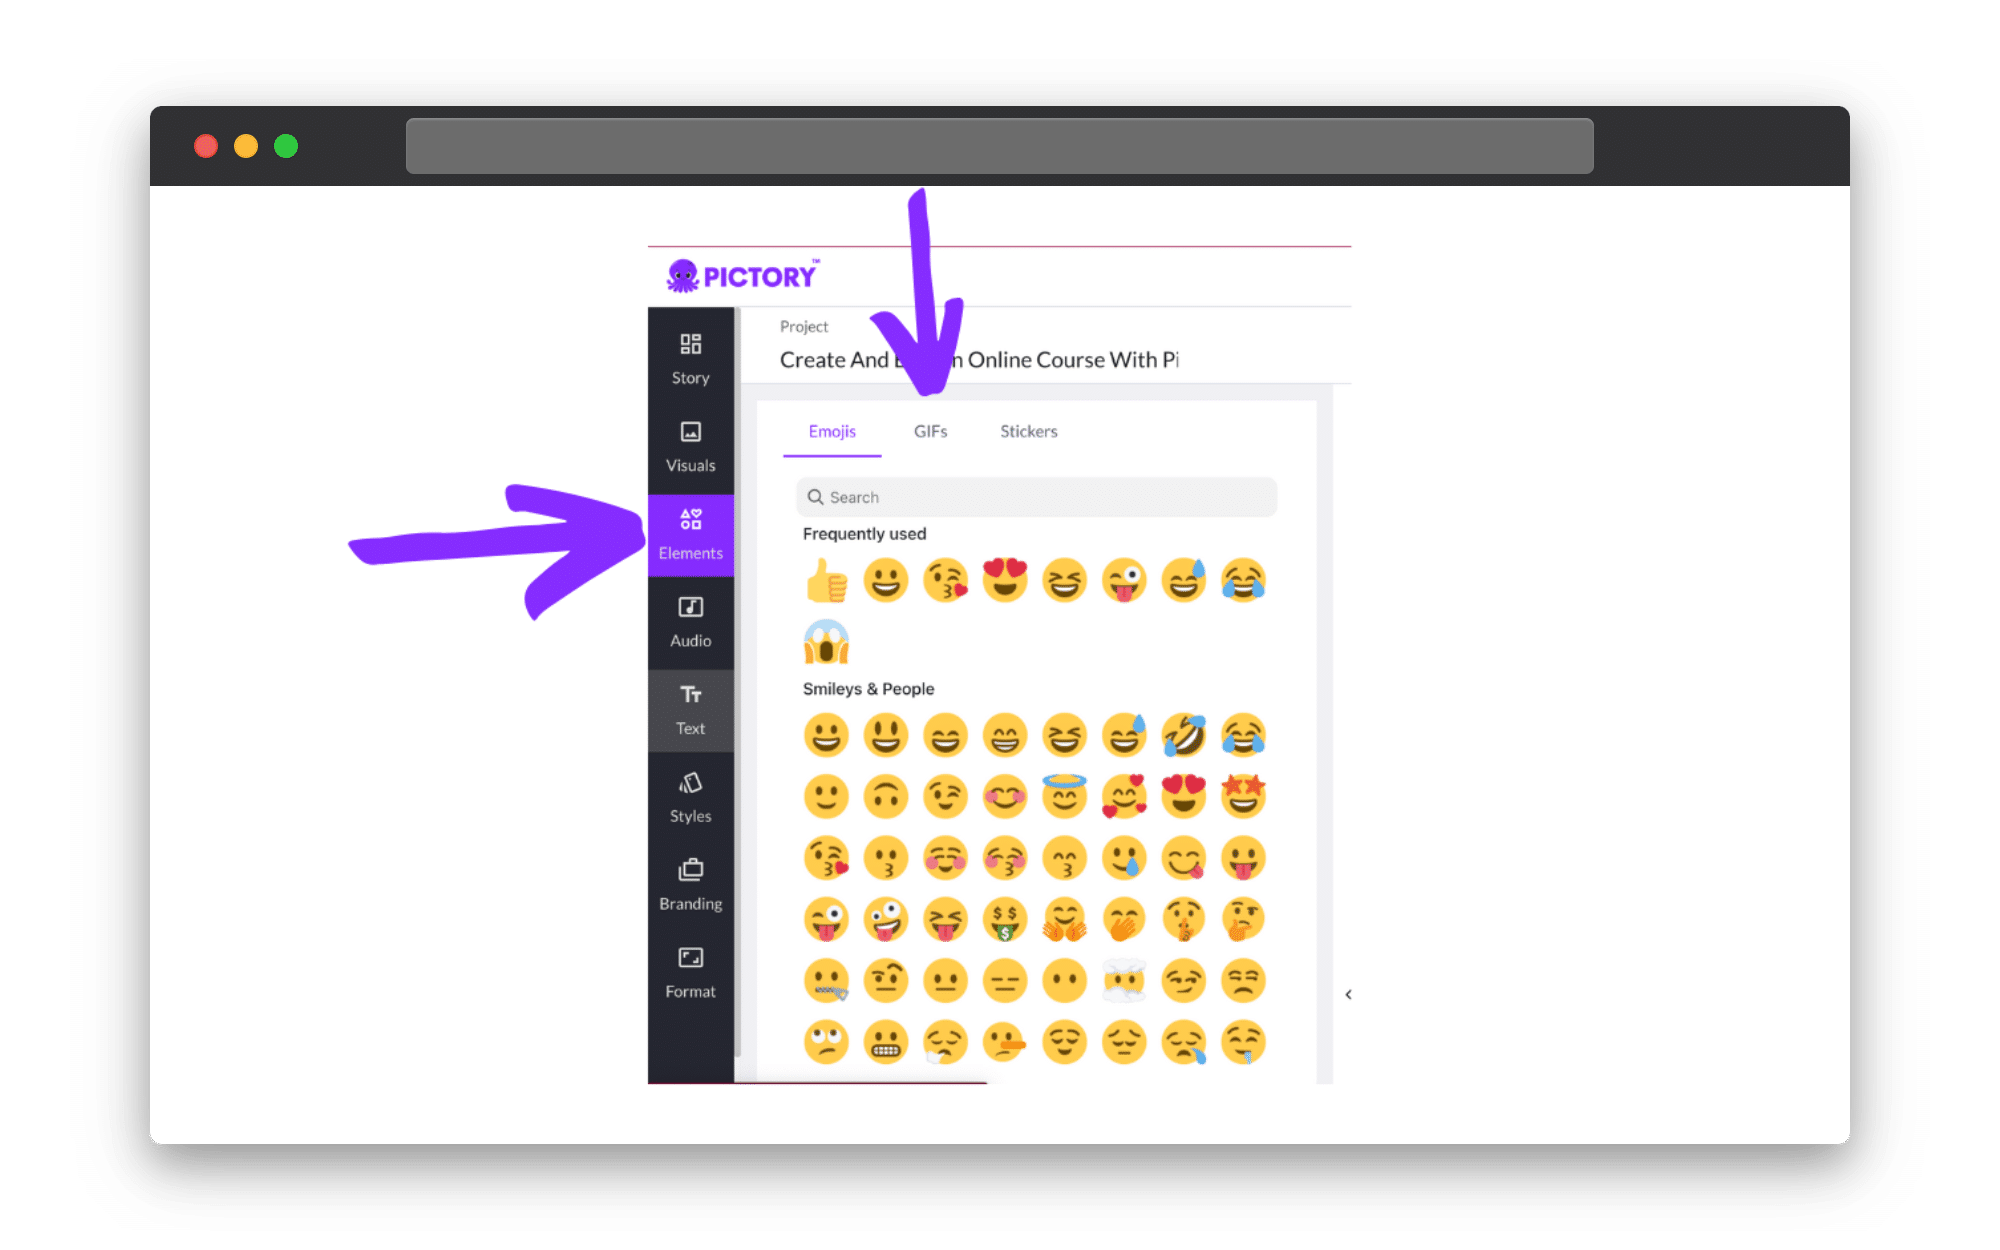 Add emojis, stickers, and GIFs to your video projects in seconds